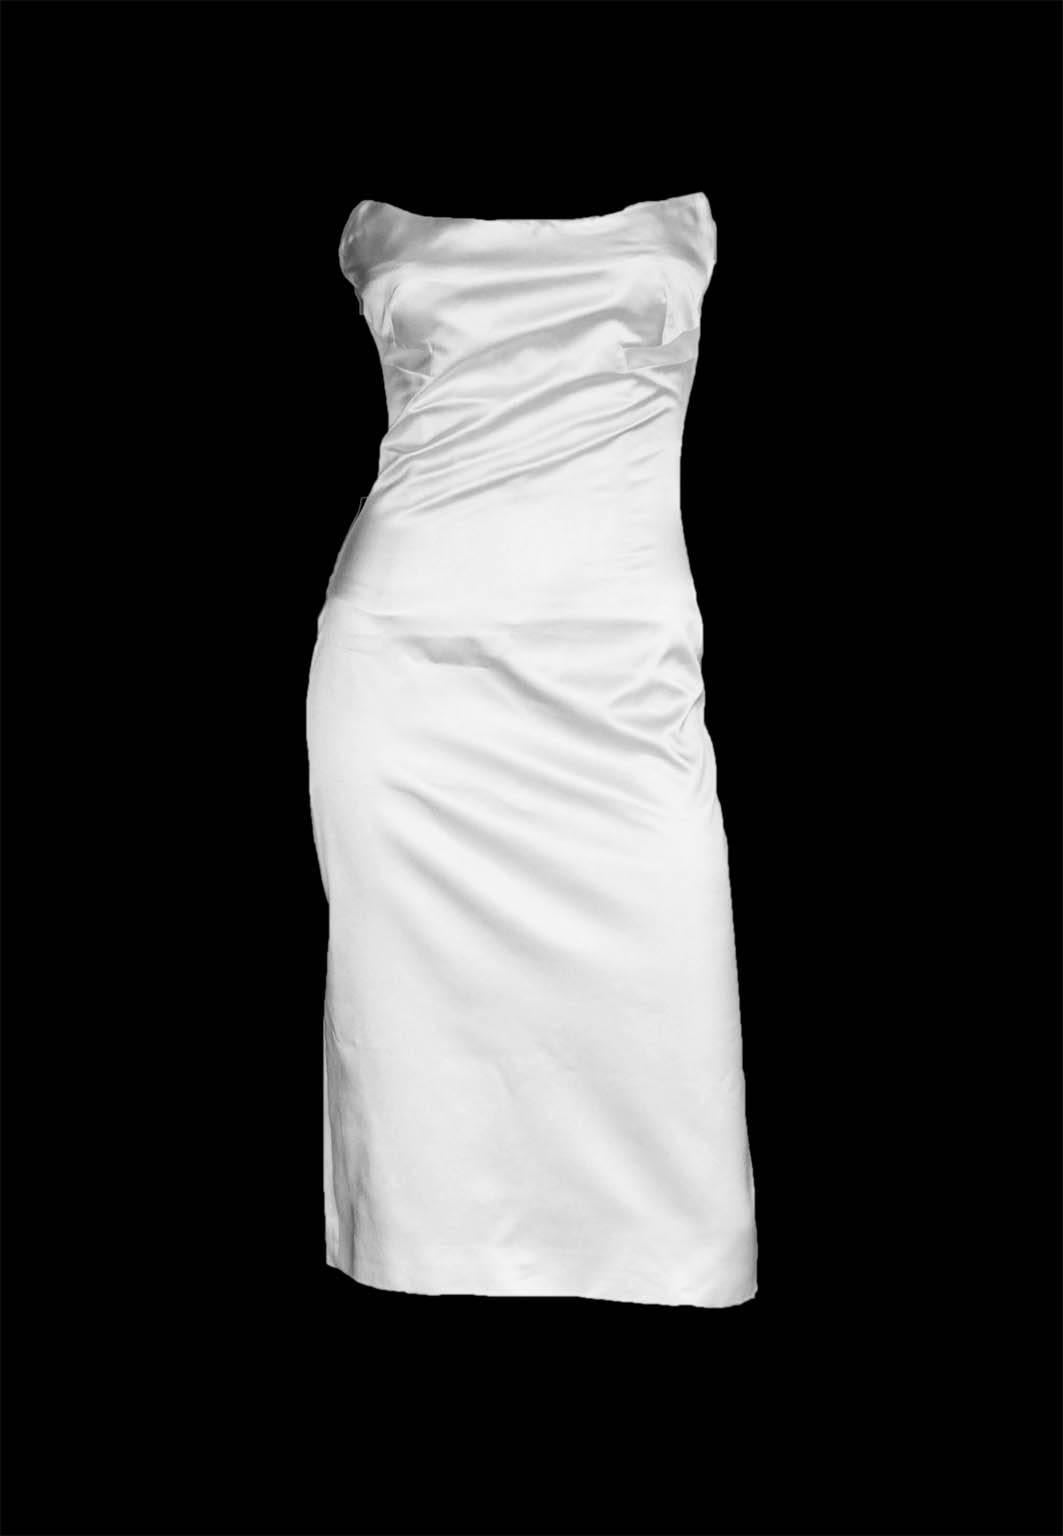 That Iconic Tom Ford Gucci Spring Summer 2001 White Silk Corset Runway Dress In Italian Size 44!

Who could ever forget that heavenly white silk corset dress from Tom Ford's incredible spring/summer 2001 collection for Gucci. Hugely sought after &